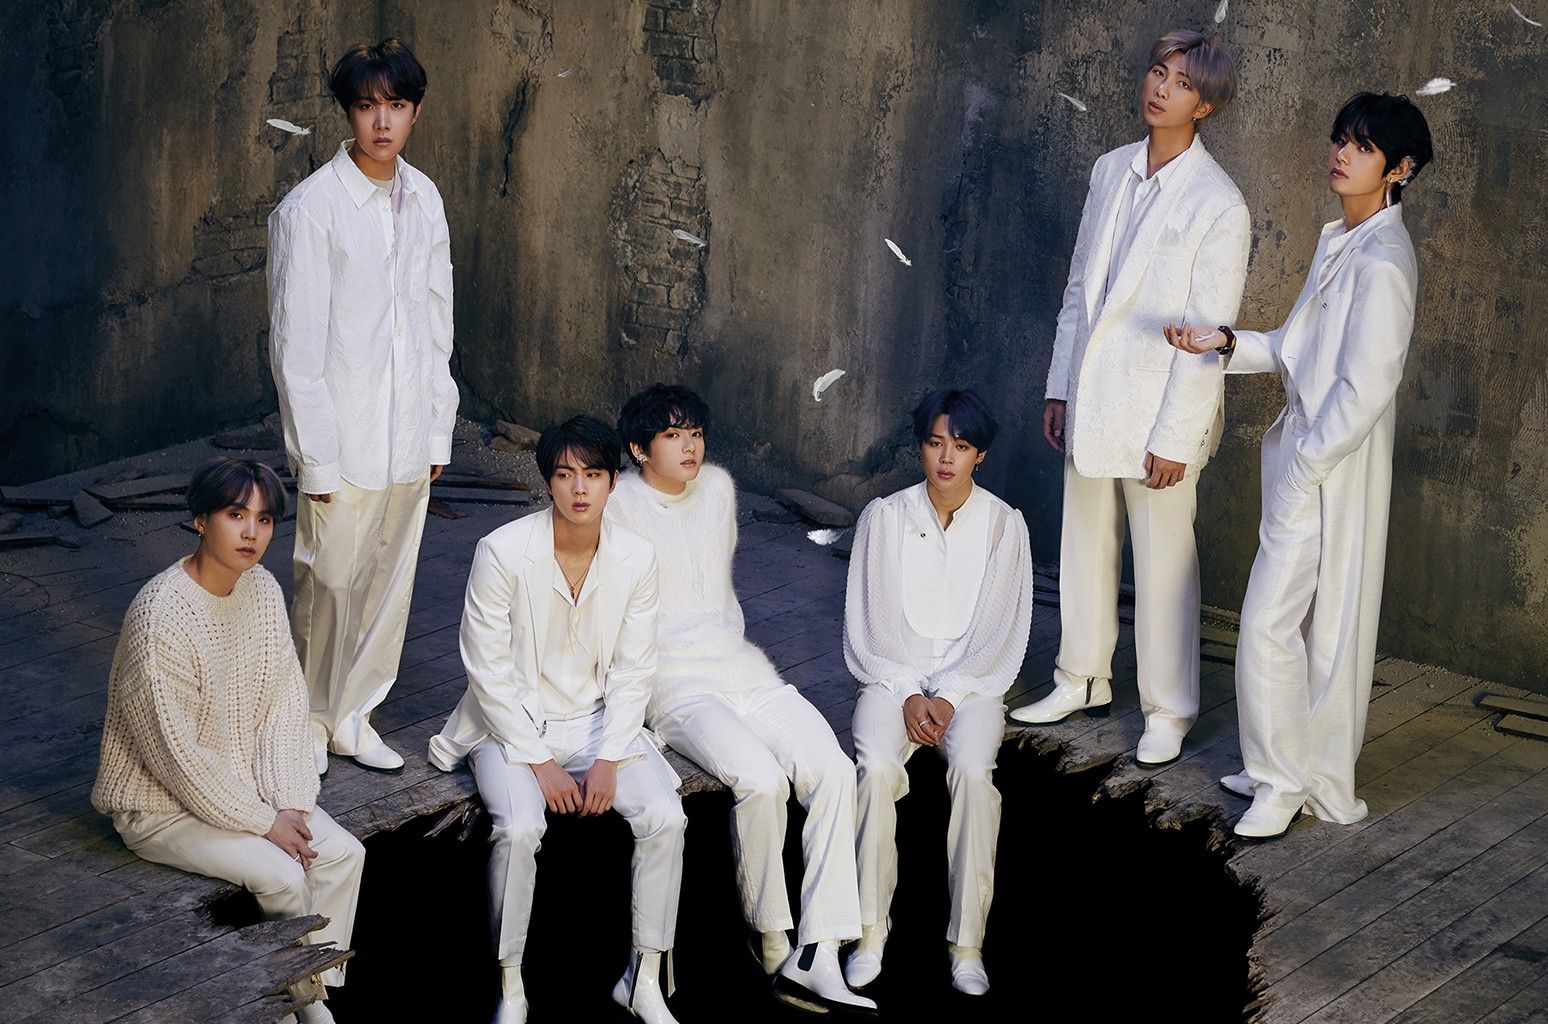 From BTS' 'Dynamite' Single to Mariah Carey & Lauryn Hill's Collab and More, What's Your Favorite New Music Release? Vote!